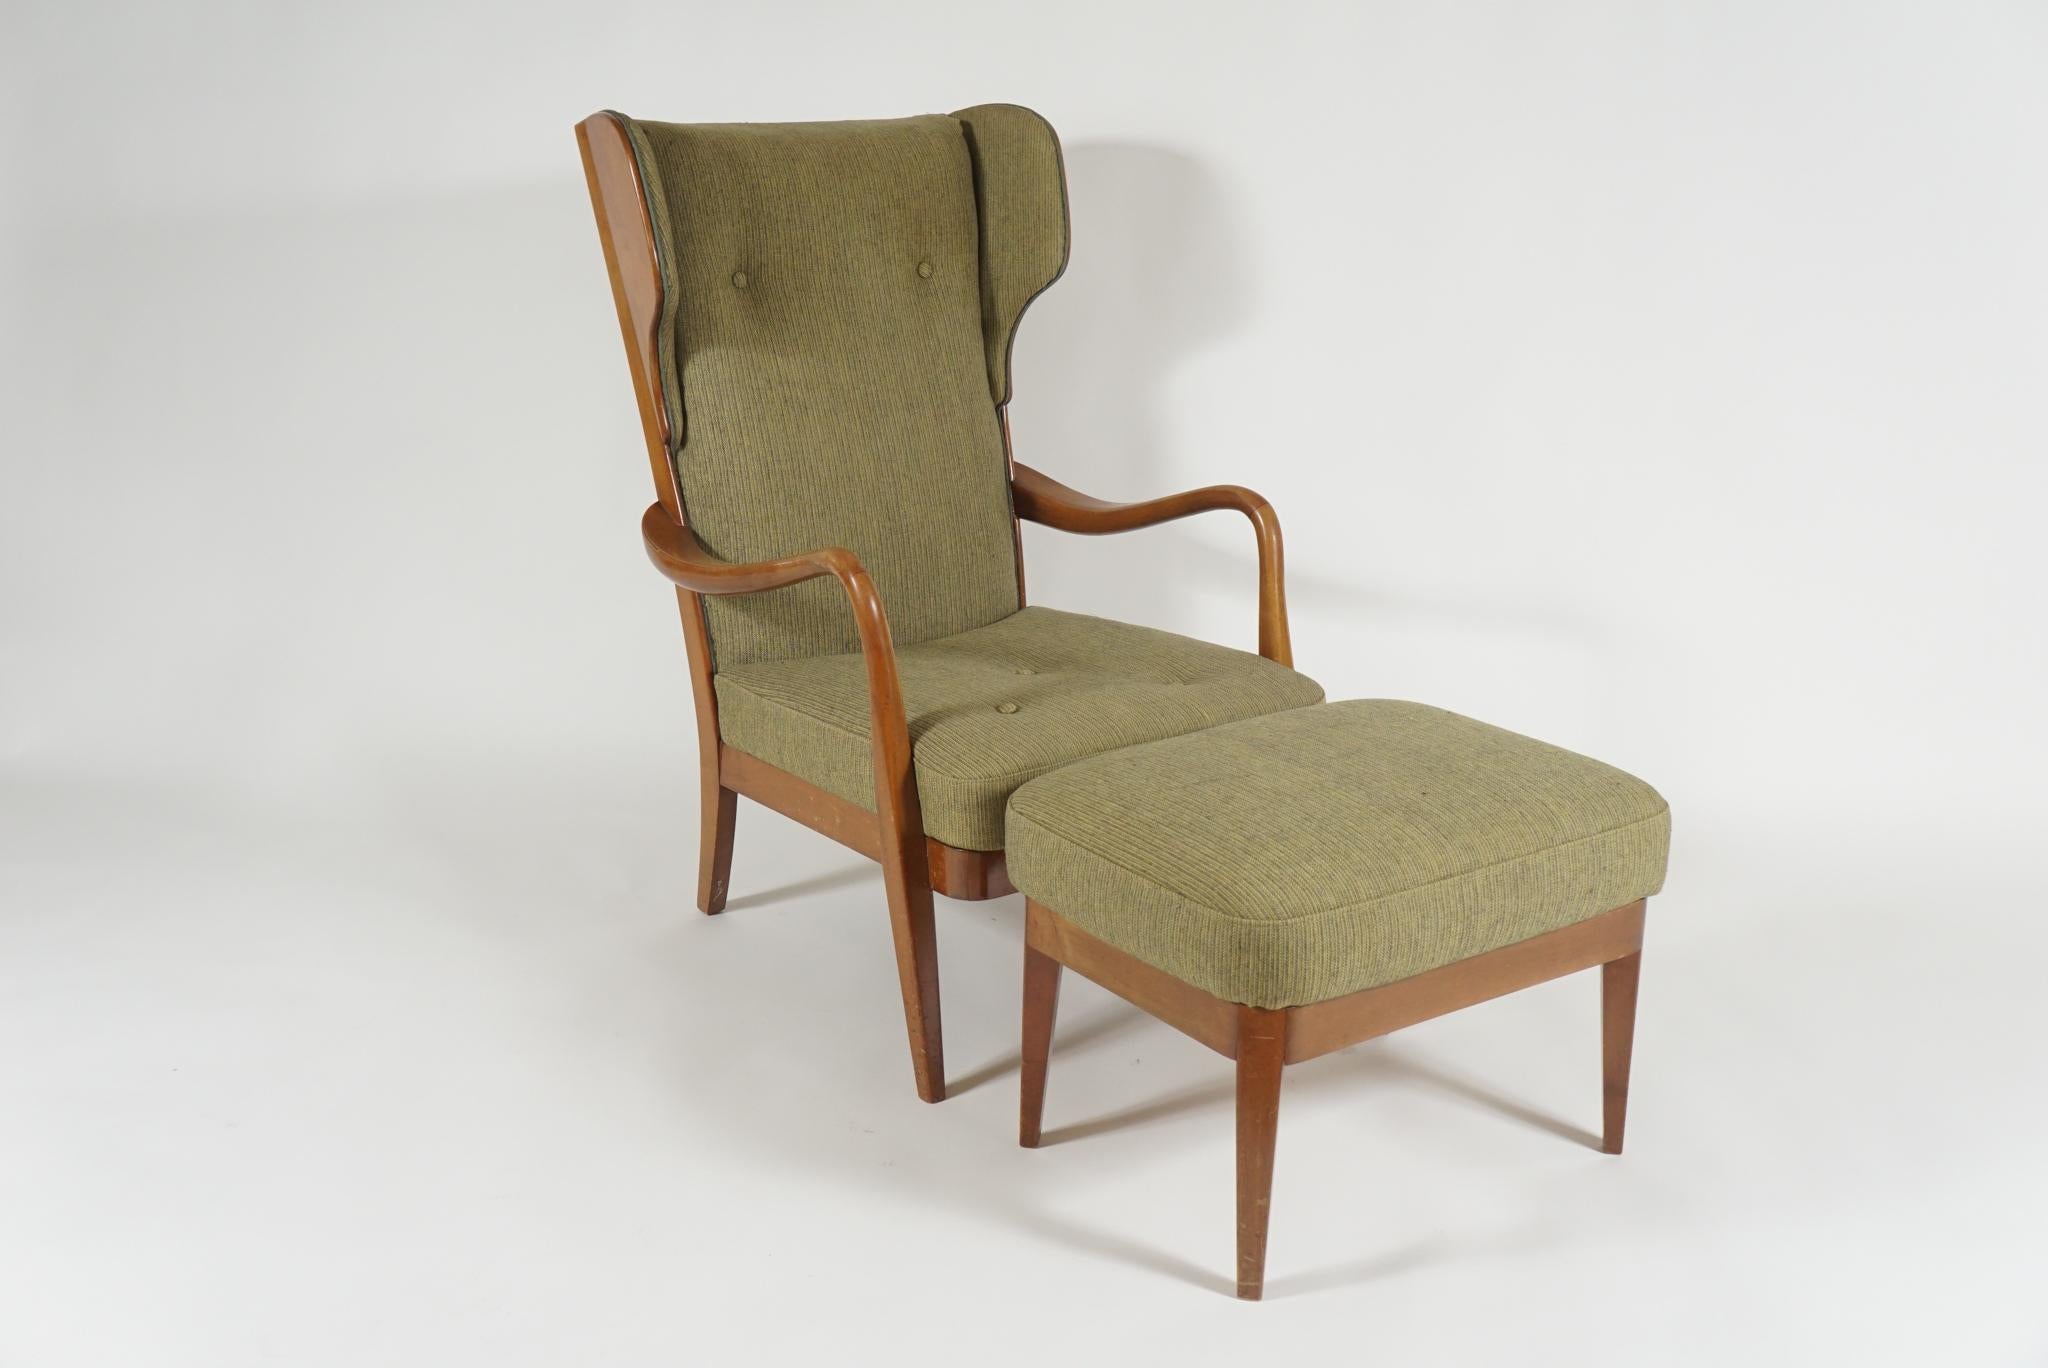 Handsome woodframe wingback armchair with matching ottoman, Danish modern in mahogany. Upholstered in original green wool, however will need the back re-upholstered as one side has cat scratches.